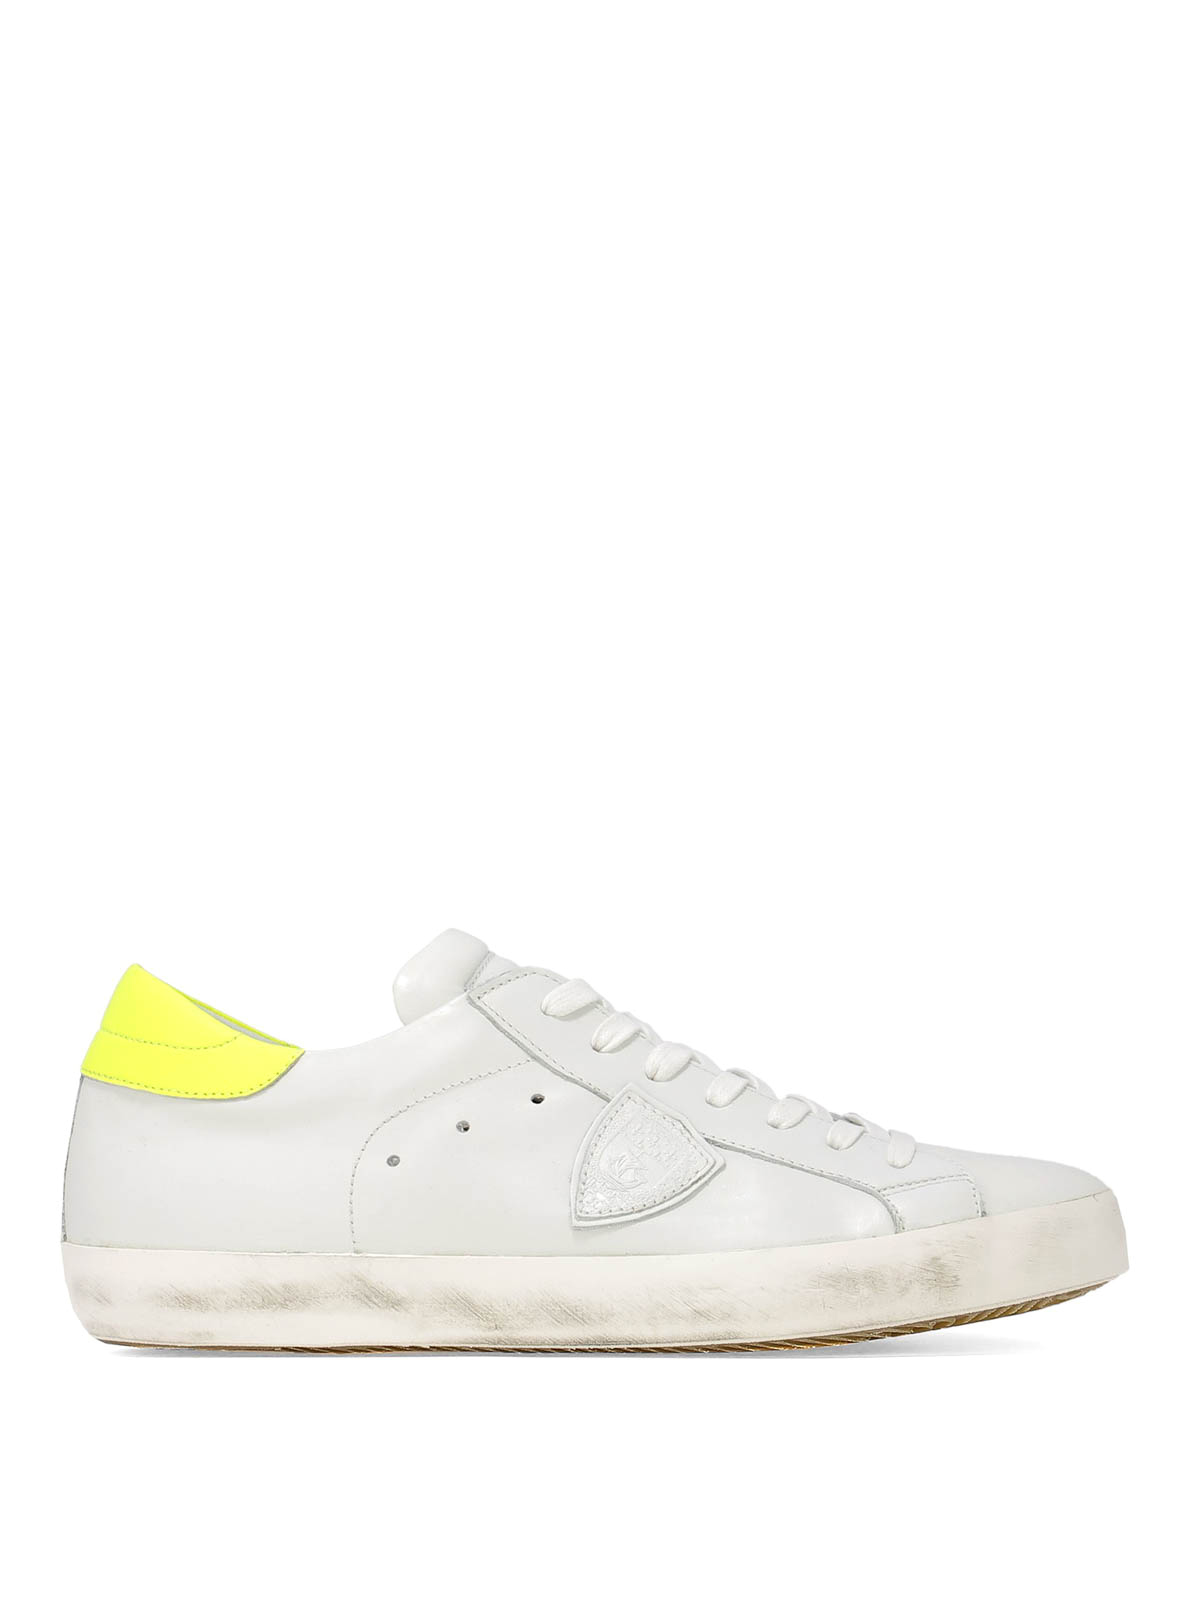 Philippe Model - Paris low top white and yellow sneakers - trainers -  CLLUVN06